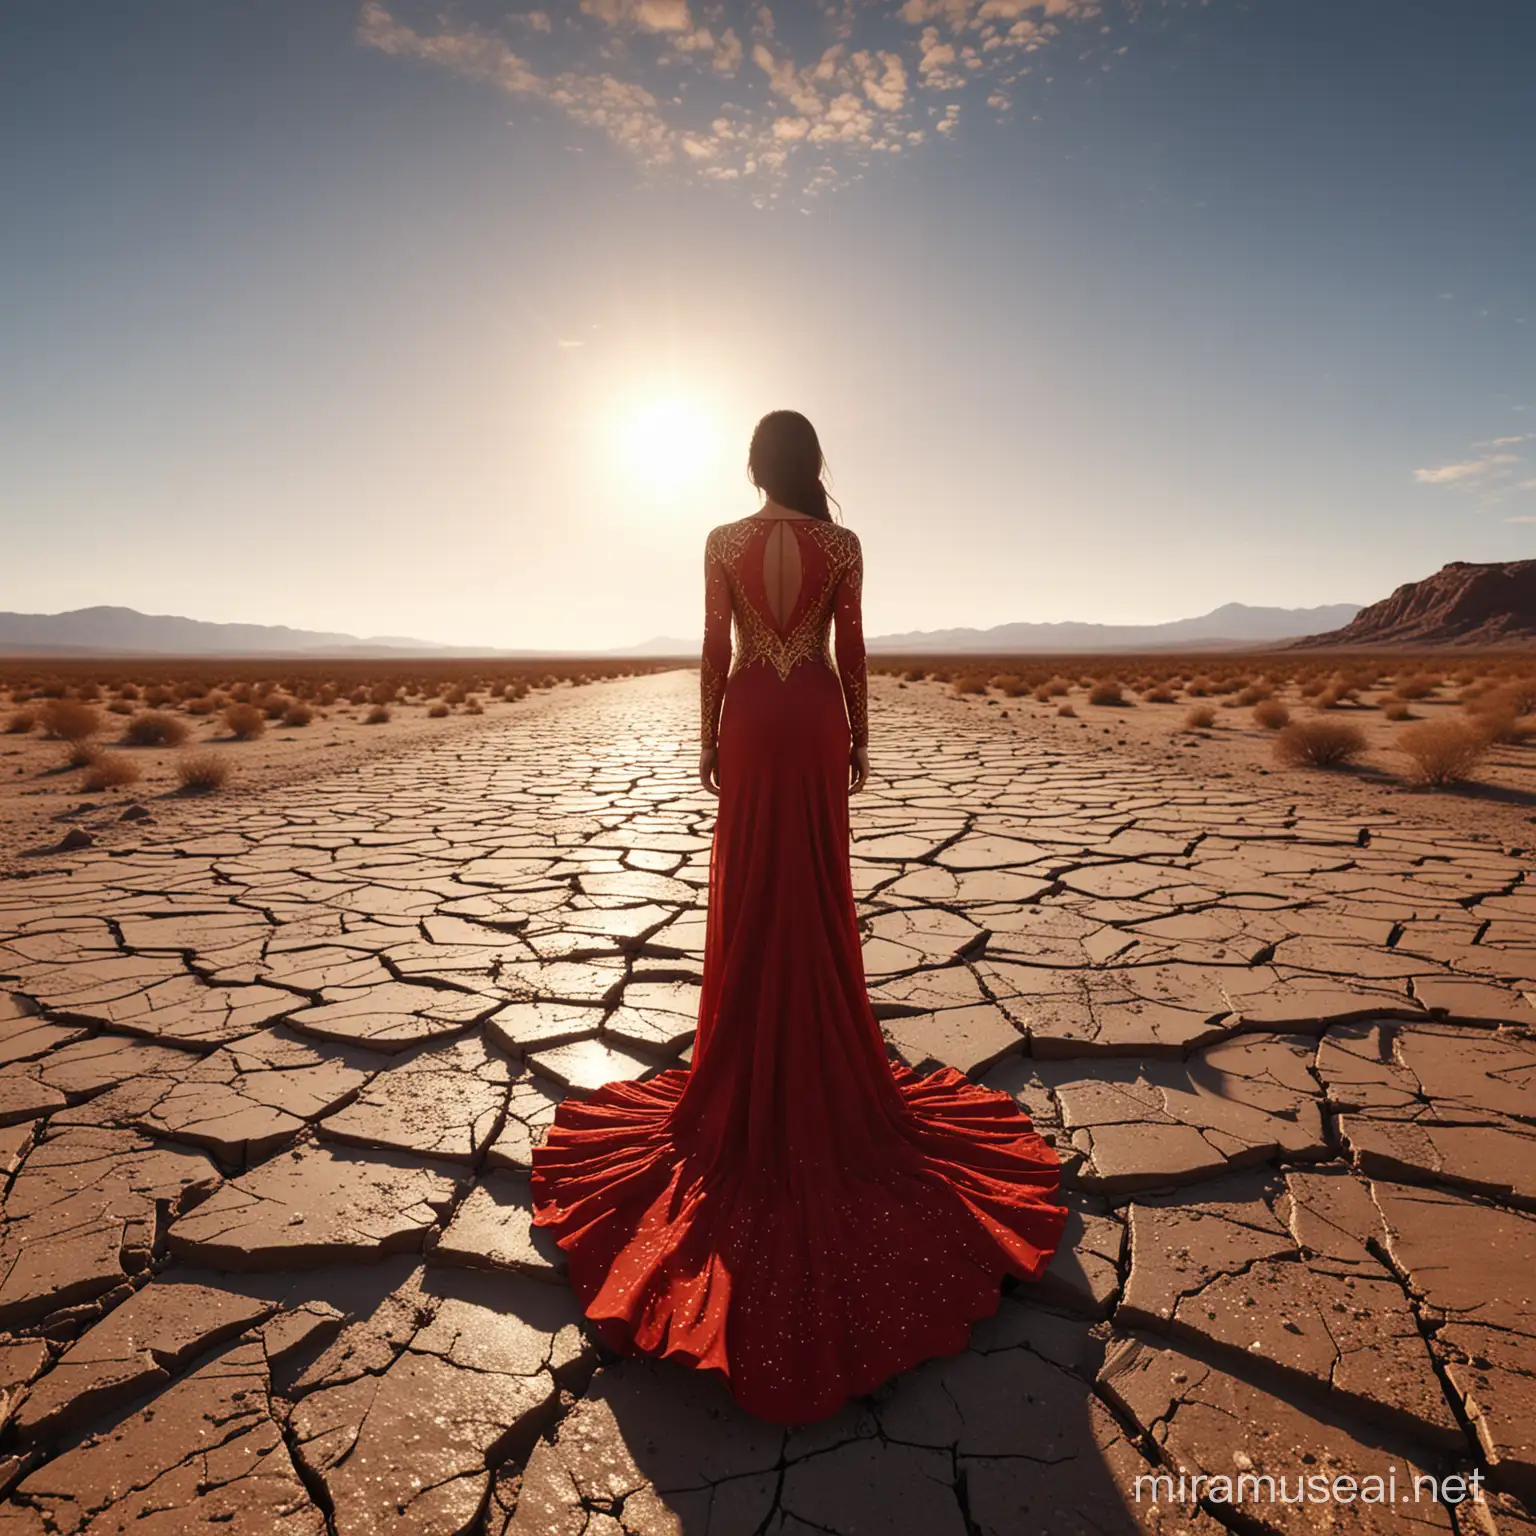 A woman with intricate golden red-dress is standing in a desert. She has no face. She is looking at the reflection of her face on a piece of sky that has fallen from the sky. Above her, the sky is cracked and pieces of it fallen to the ground. Cinematic, ambient lighting, dramatic and highly detailed.